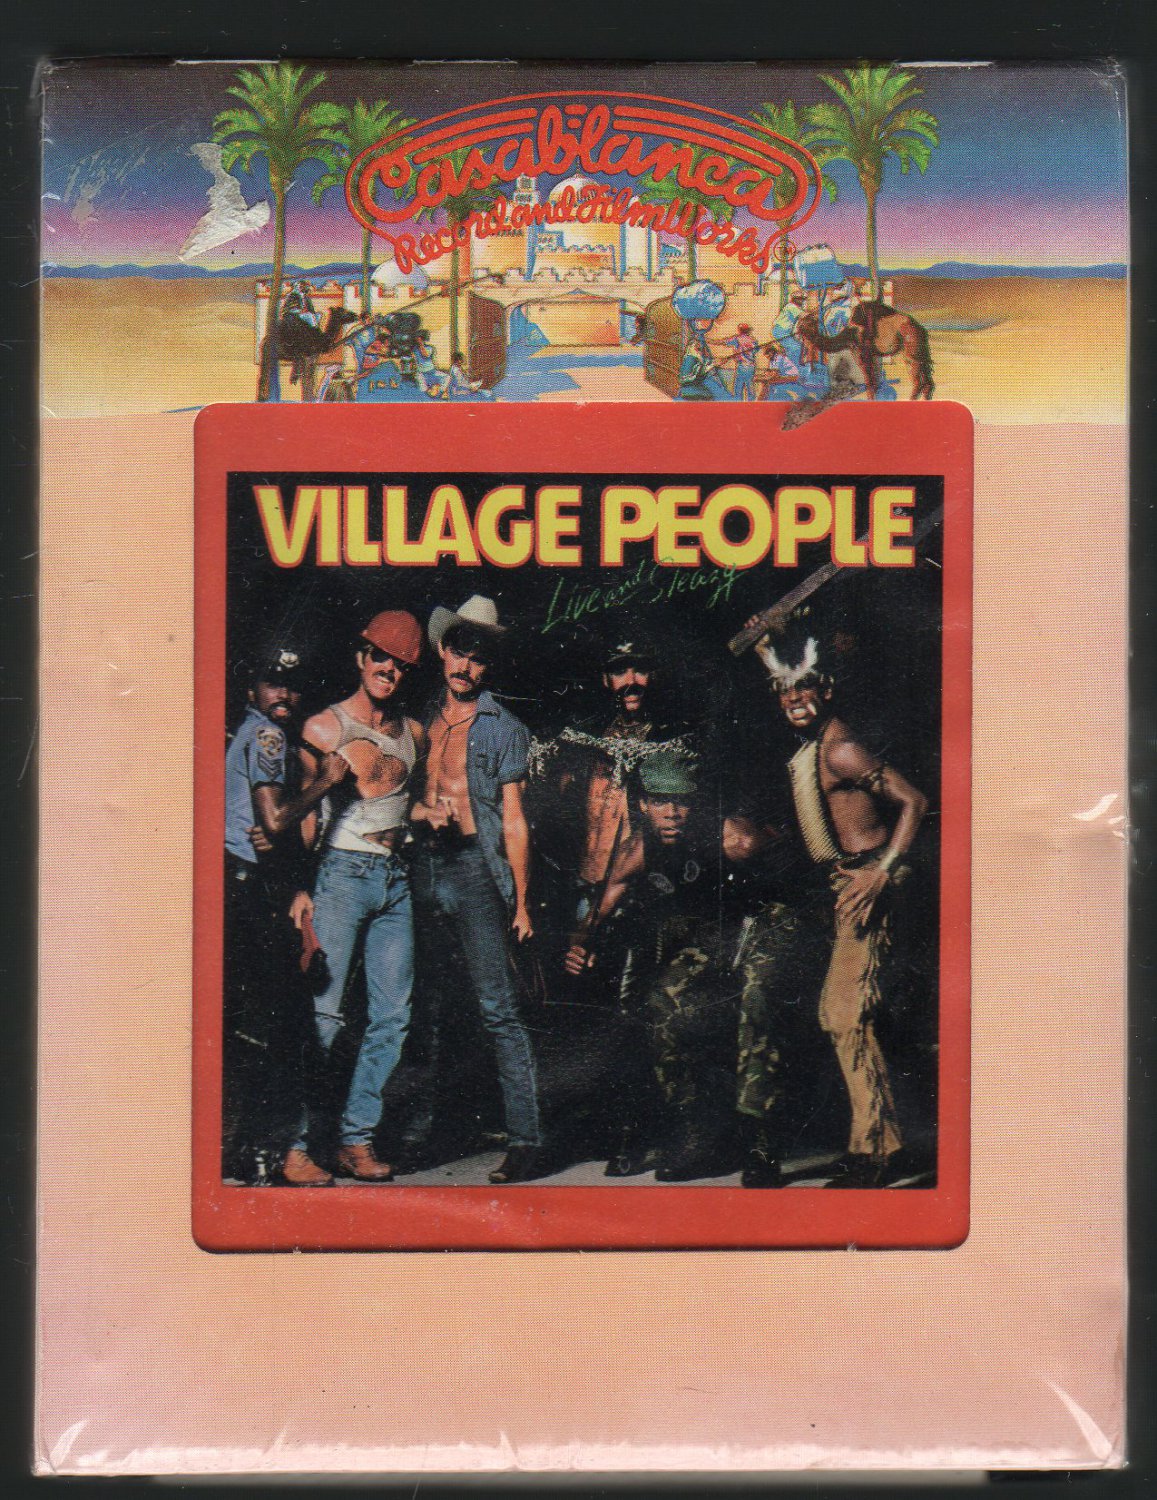 Village People - Live And Sleazy 1979 CASABLANCA Sealed A34 8-track tape